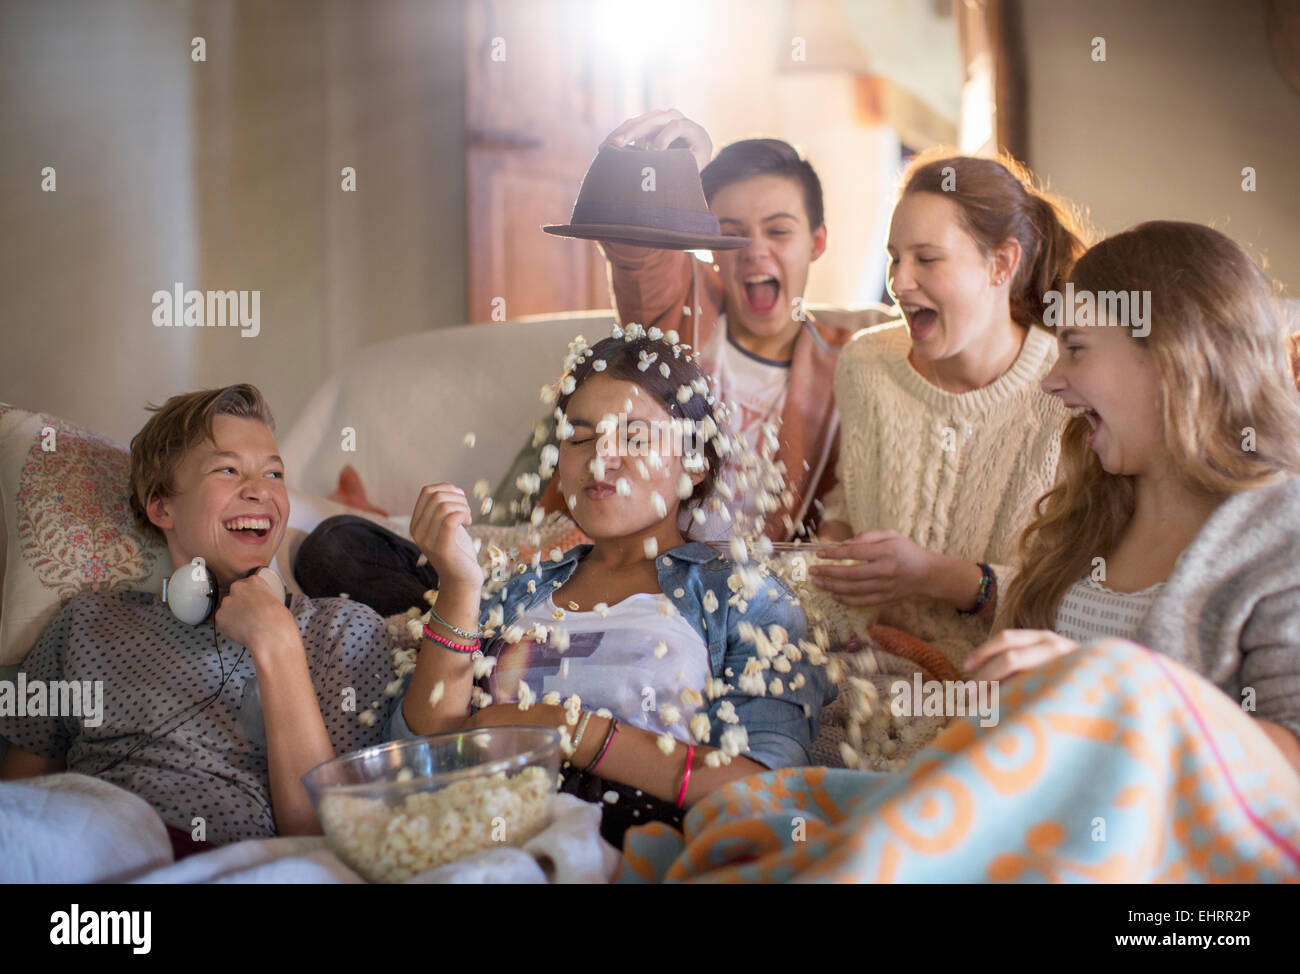 Group of teenagers throwing popcorn on themselves while sitting on sofa Stock Photo